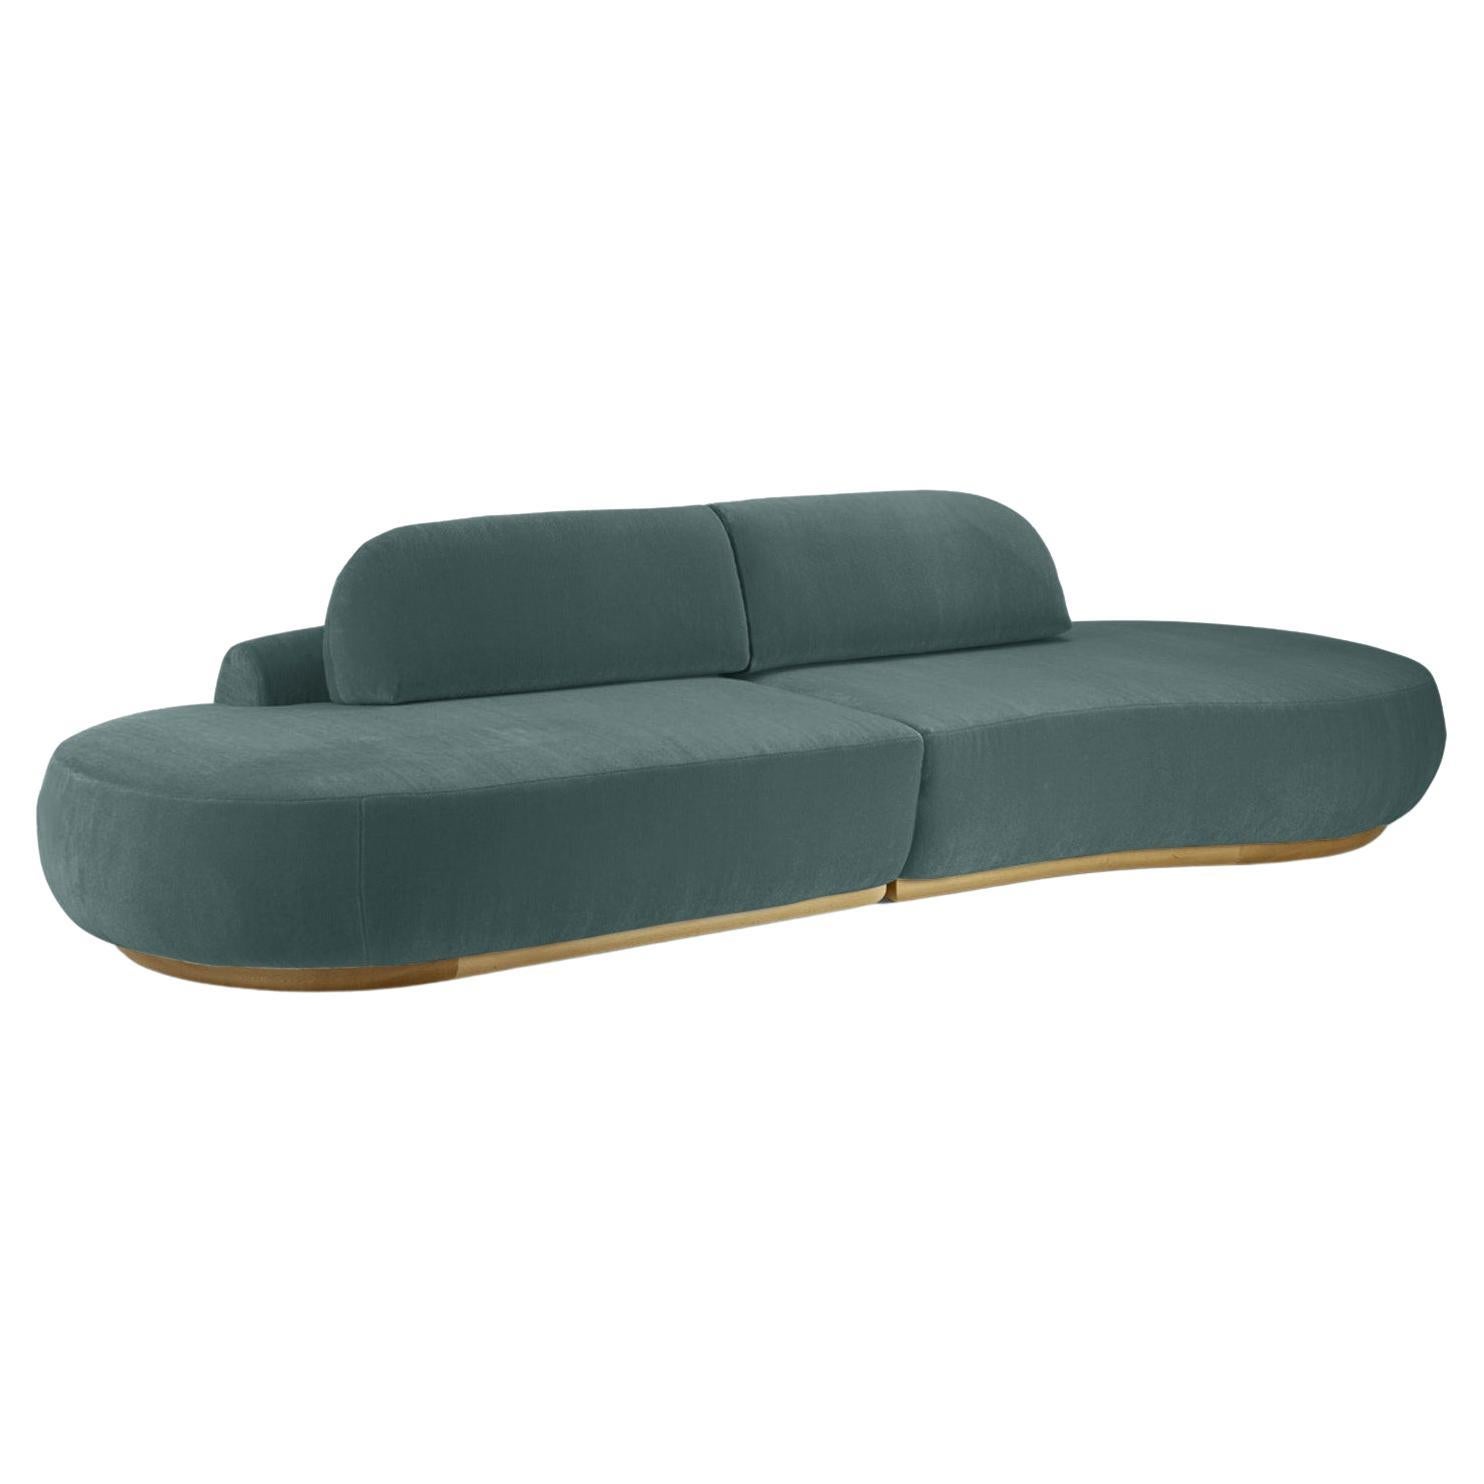 Naked Curved Sectional Sofa, 2 Piece with Natural Oak and Teal For Sale